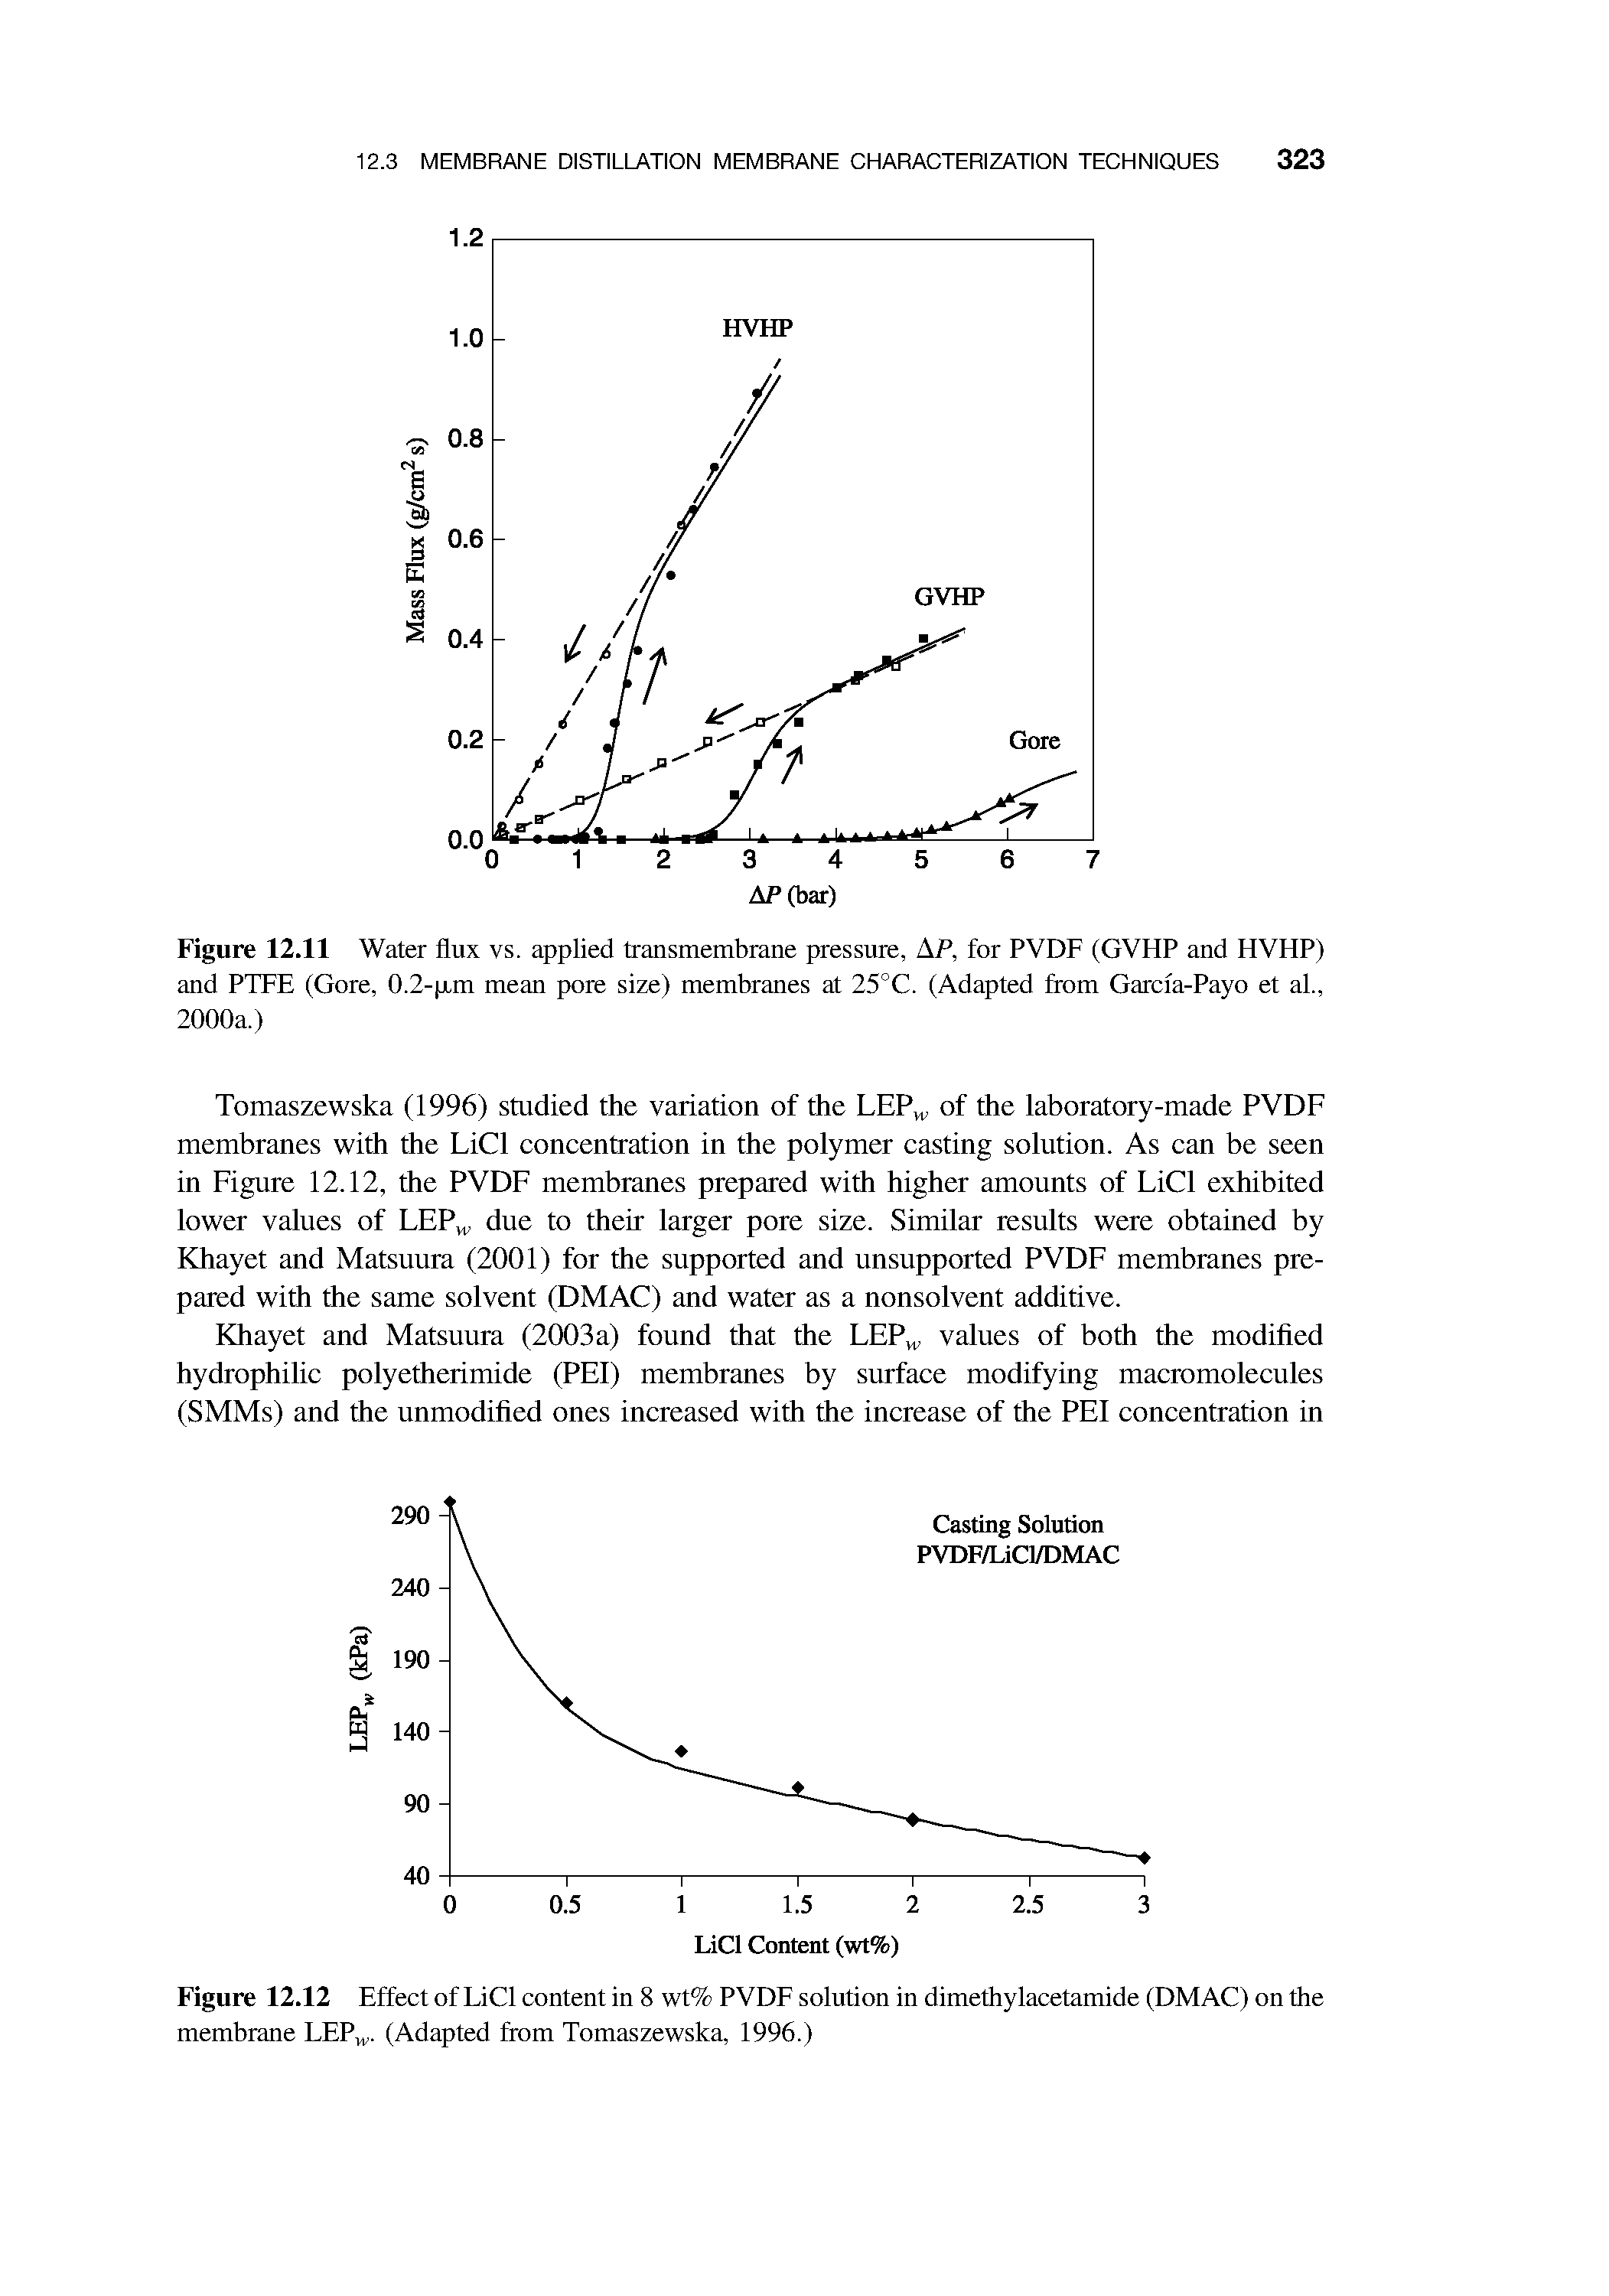 Figure 12.11 Water flux vs. applied transmembrane pressure, AP, for PVDF (GVHP and HVHP) and PTFE (Gore, 0.2-p.m mean pore size) membranes at 25°C. (Adapted from Garcfa-Payo et al., 2000a.)...